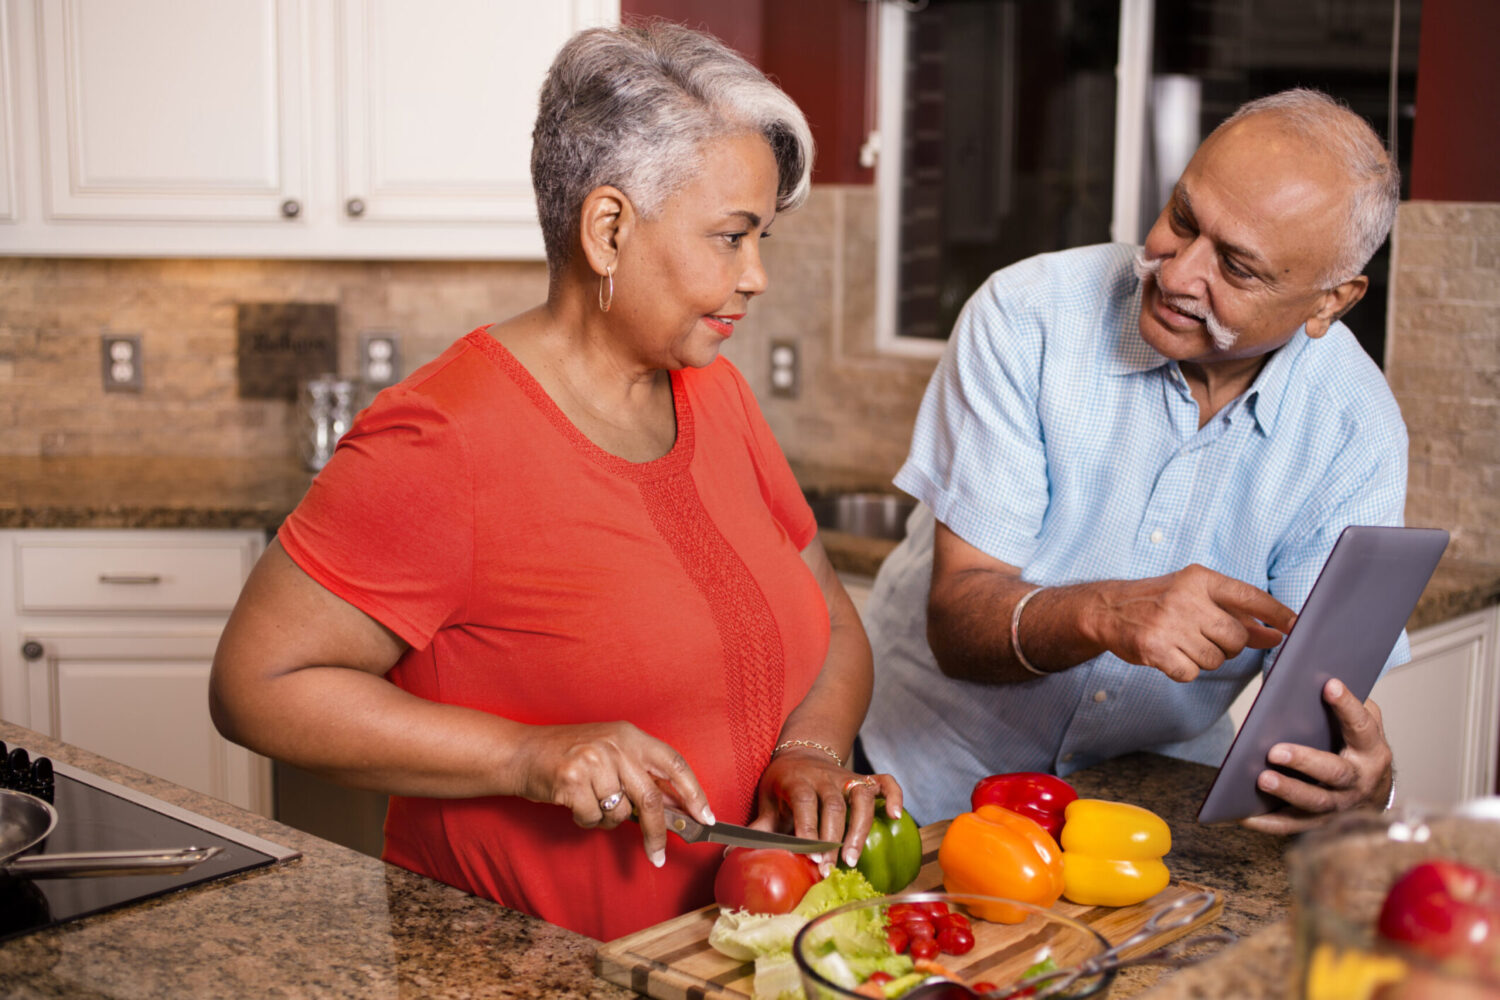 Senior adult (Indian and African descent) couple cooking dinner together at home. They are enjoying their retirement years as they work together to chop healthy vegetables.  Man shows woman recipe on digital tablet.